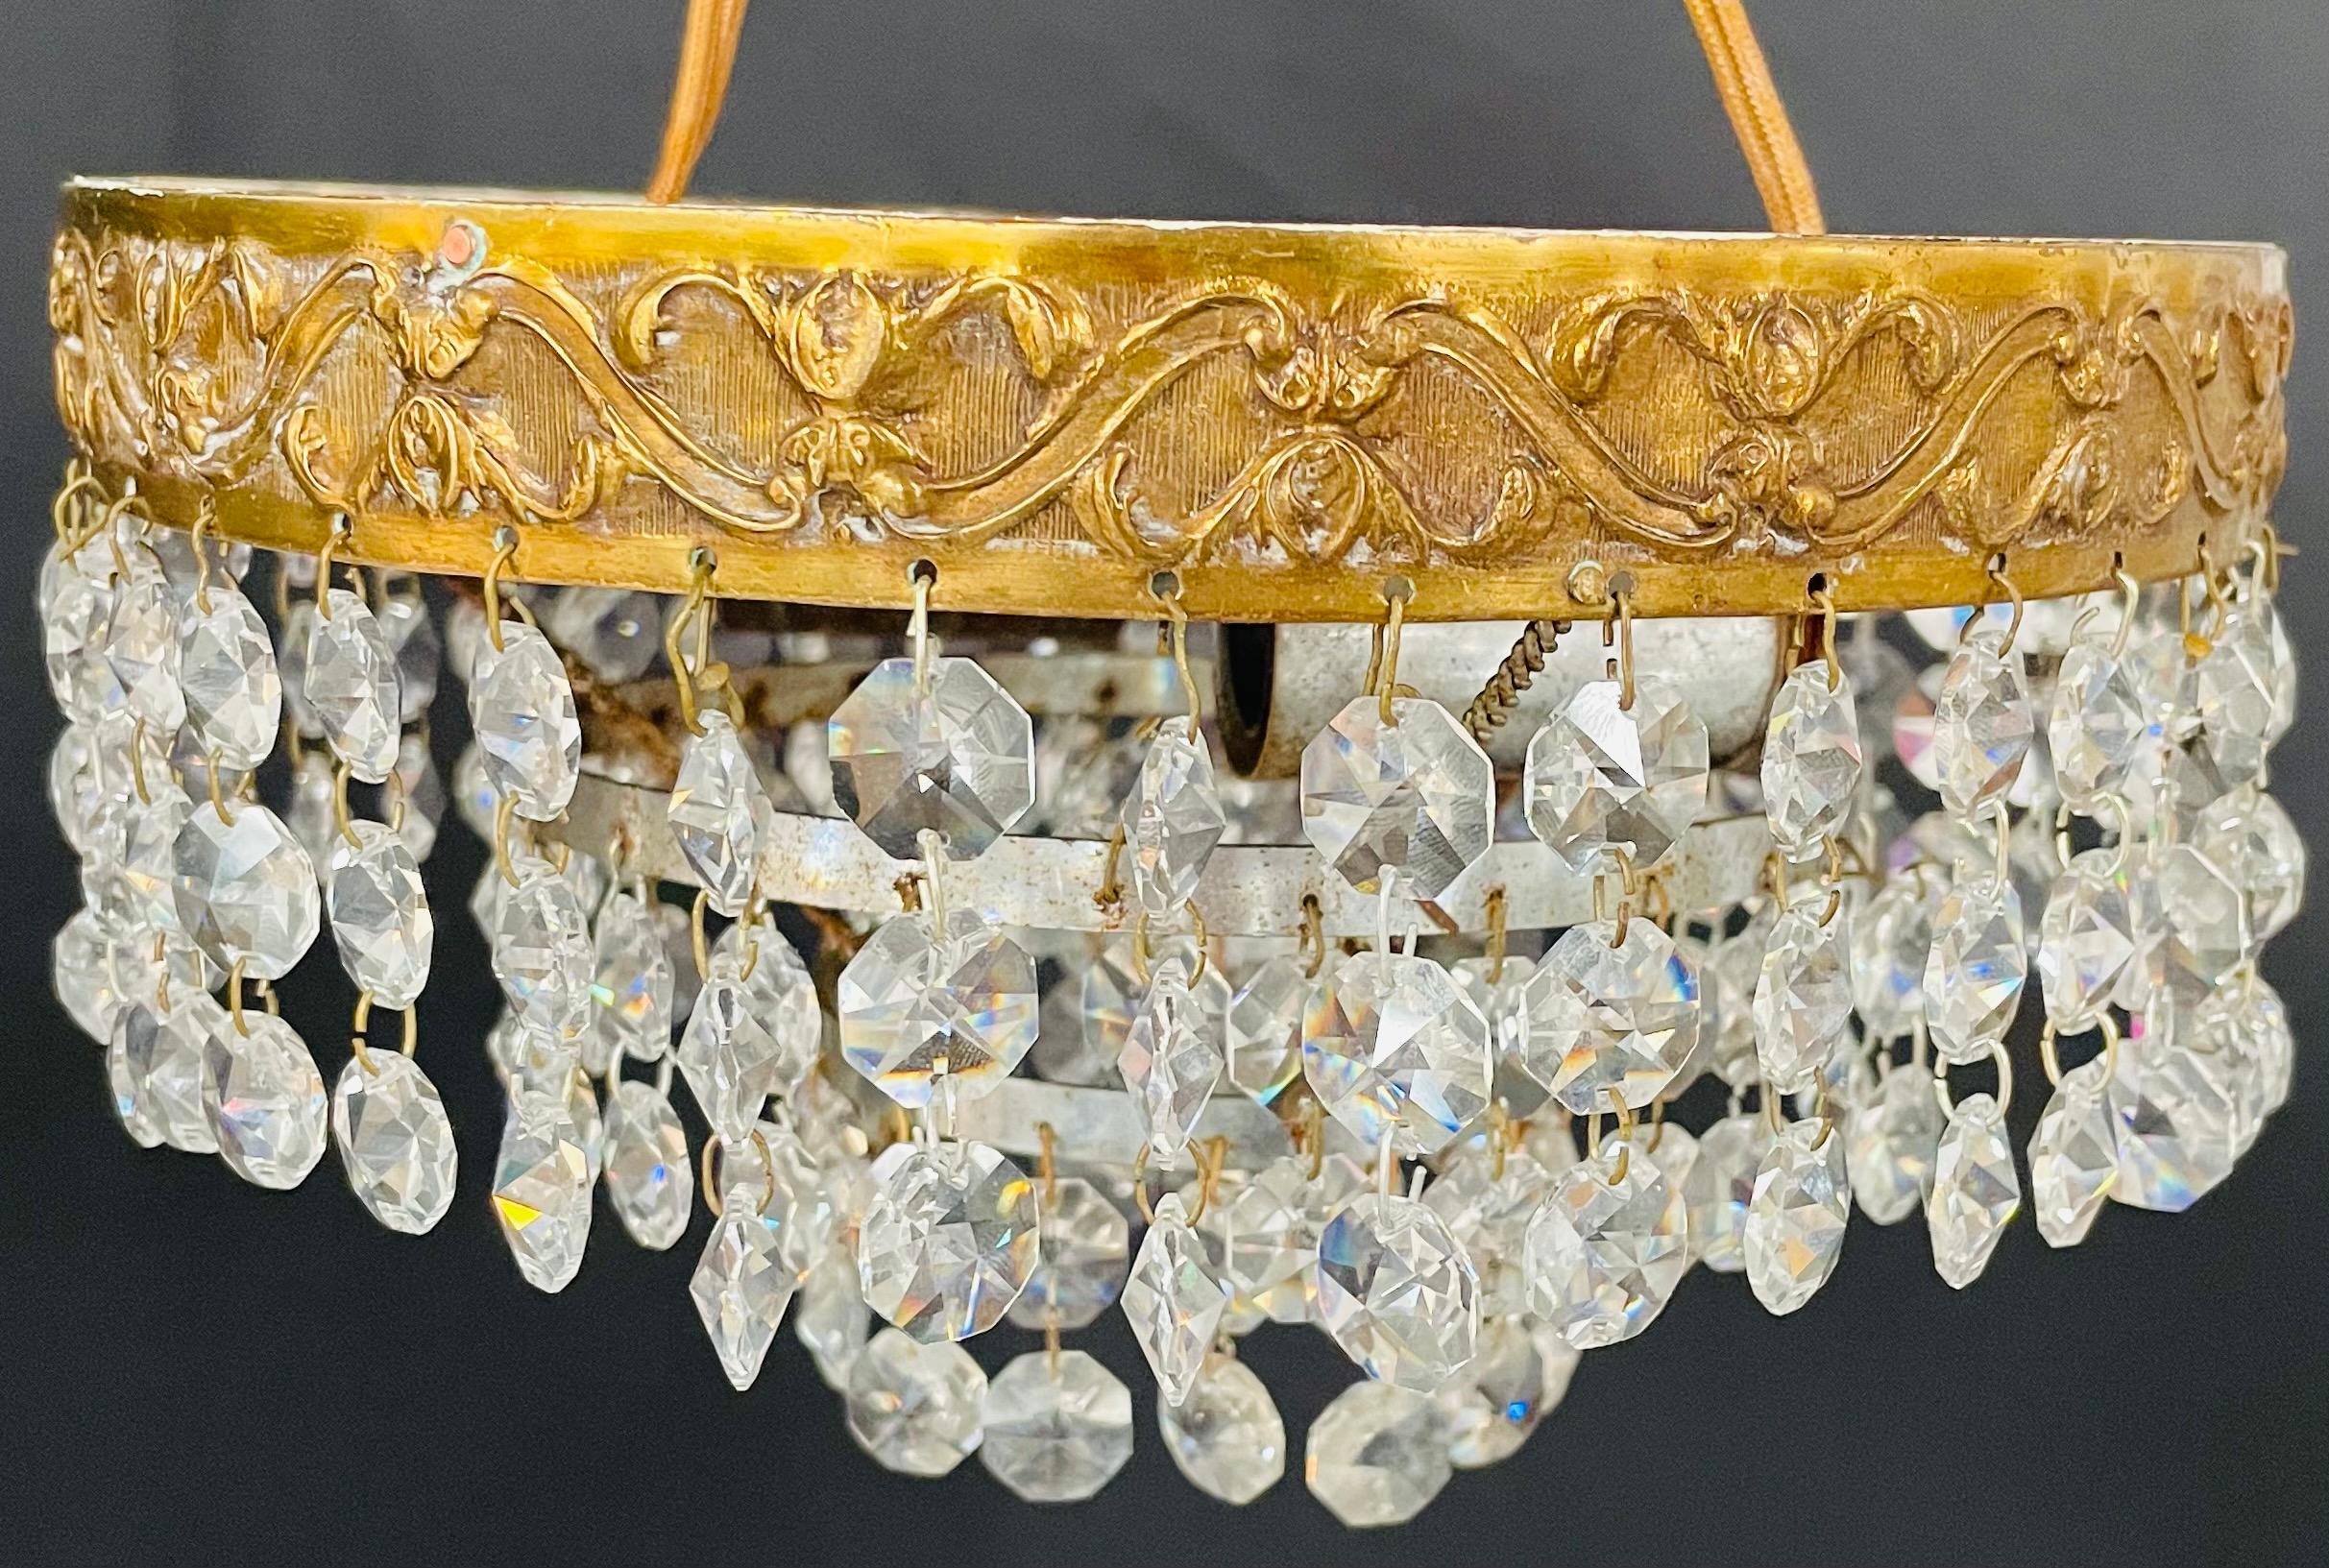 A French Regency style diminutive crystal chandelier. The circular shaped small chandelier features a brass band finely decorated and crystal prisms hanging from the band and from inside the chandelier. Perfect for hallway, small space or a bathroom